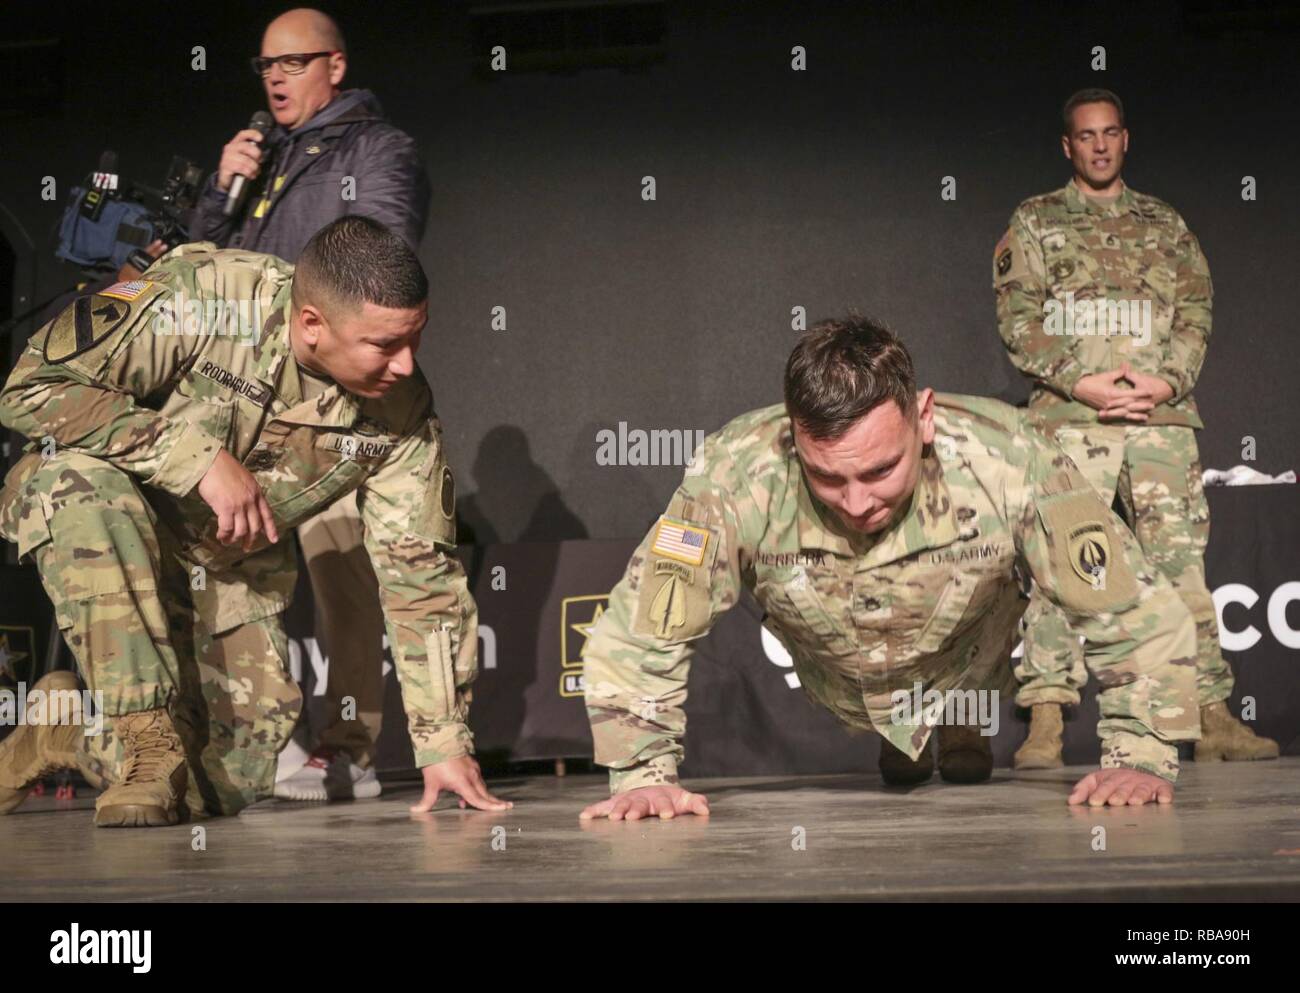 Army Staff Sgt. Rodrigo Rodriguez (Left), a recruiter assigned to the 5th Recruiting Brigade, counts push-ups for Army Staff Sgt. Rene P. Herrera, a Chemical, Biological, Radiological, and Nuclear specialist and a Soldier mentor for the U.S. Army All-American Bowl, assigned to the 160th Special Operations Aviation Regiment during a push-up challenge pitting East versus West high-school football players and band members against each other in friendly competition.  The Soldiers got into the action, not only judging the competition, but joining the teams in the event as well.  For 16 years the U. Stock Photo